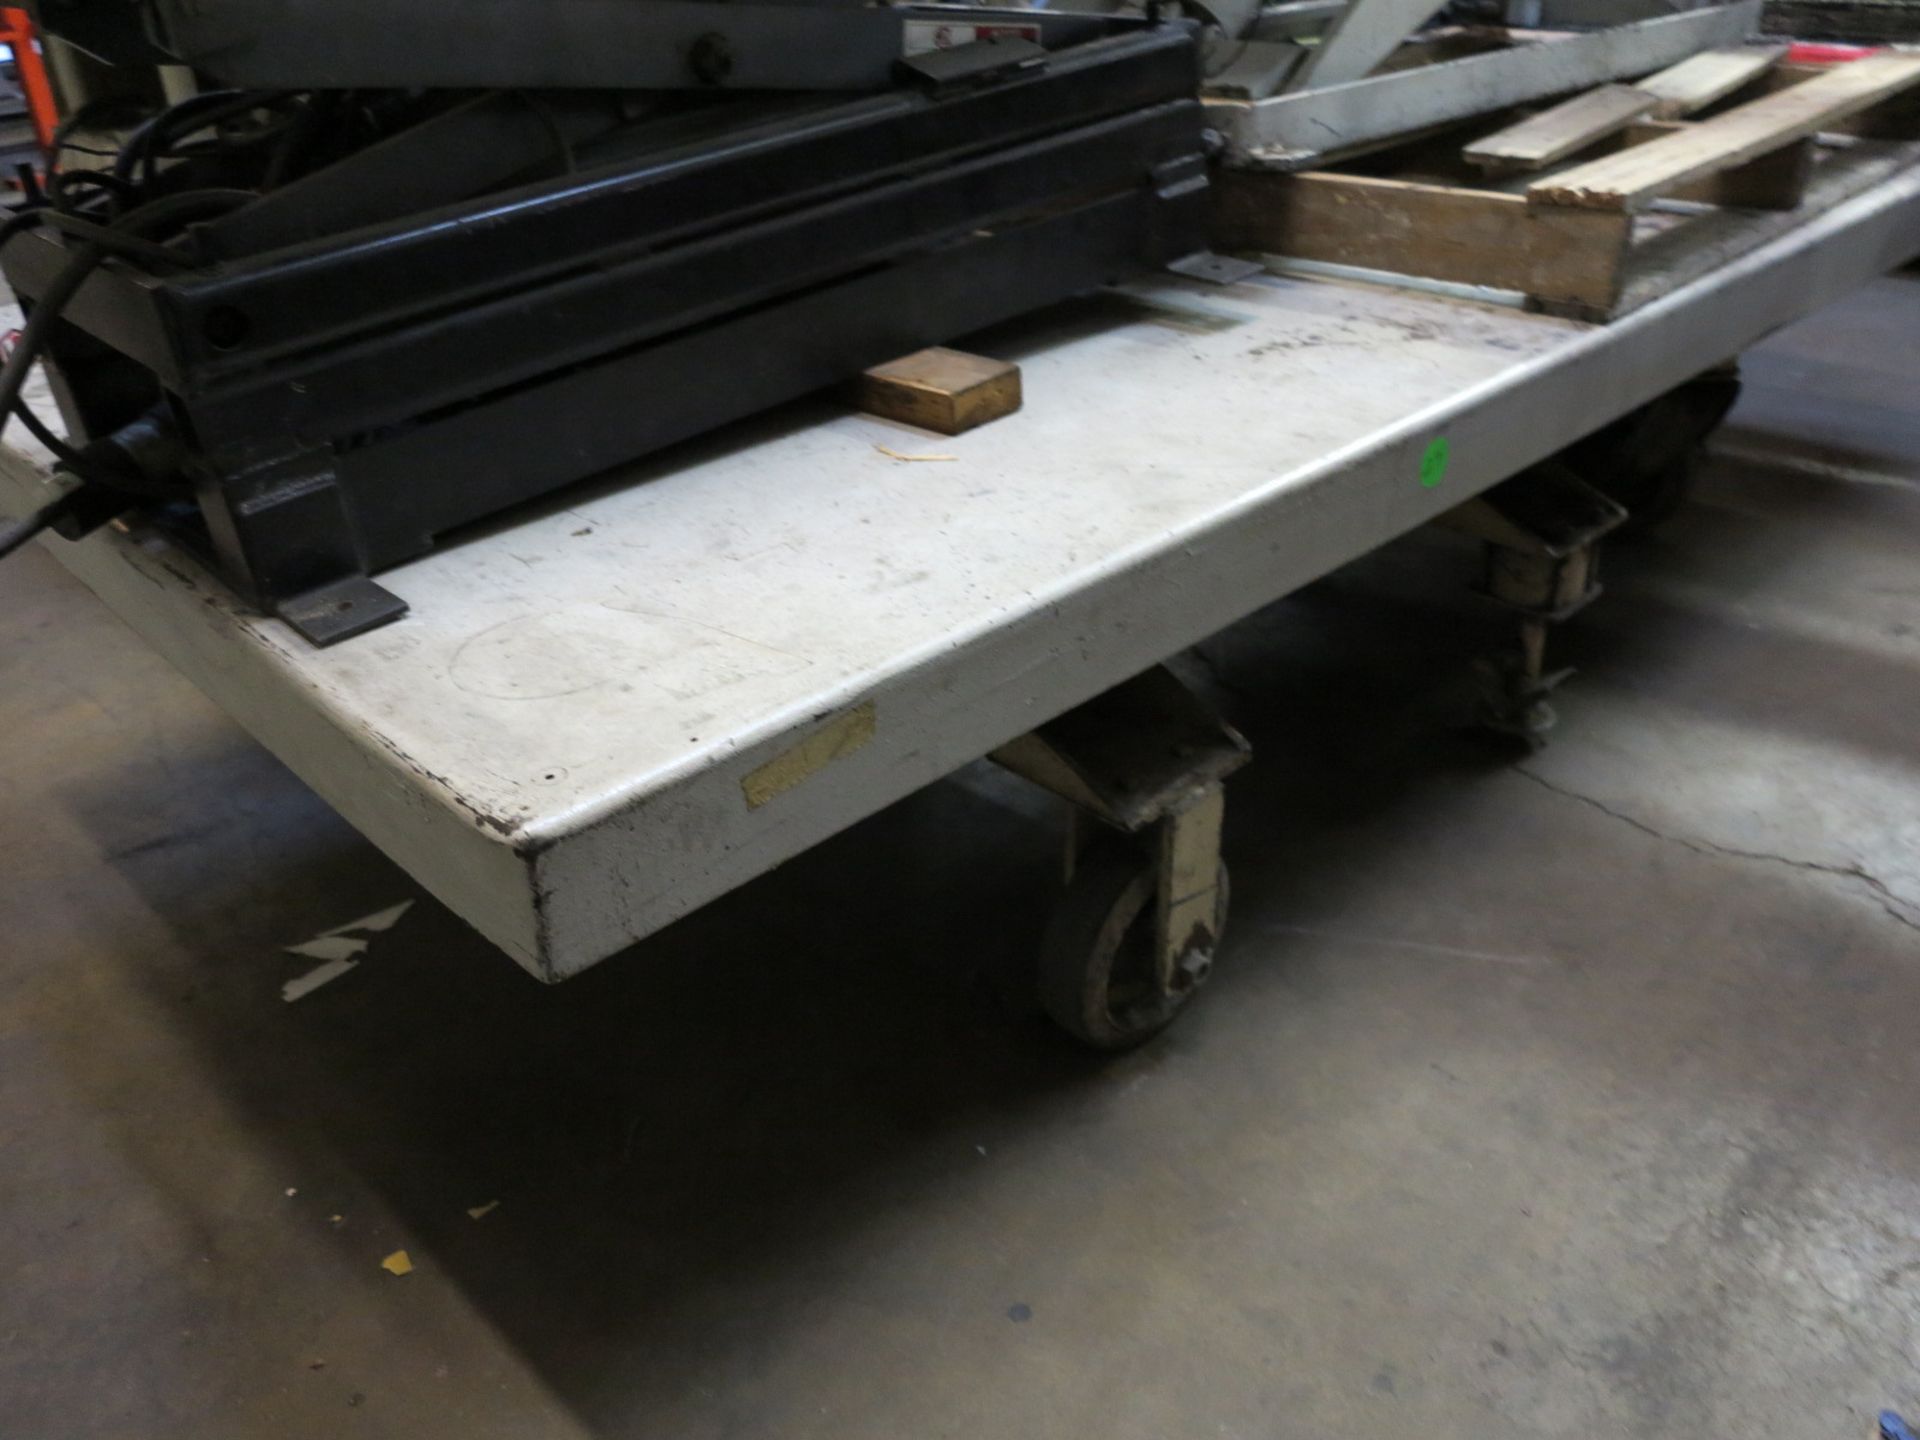 AMERICAN LIFTS 4,000 LB HYDRAULIC SCISSOR LIFT TABLE, MODEL M-1202, 4' X 8', ON CASTERS - Image 2 of 2